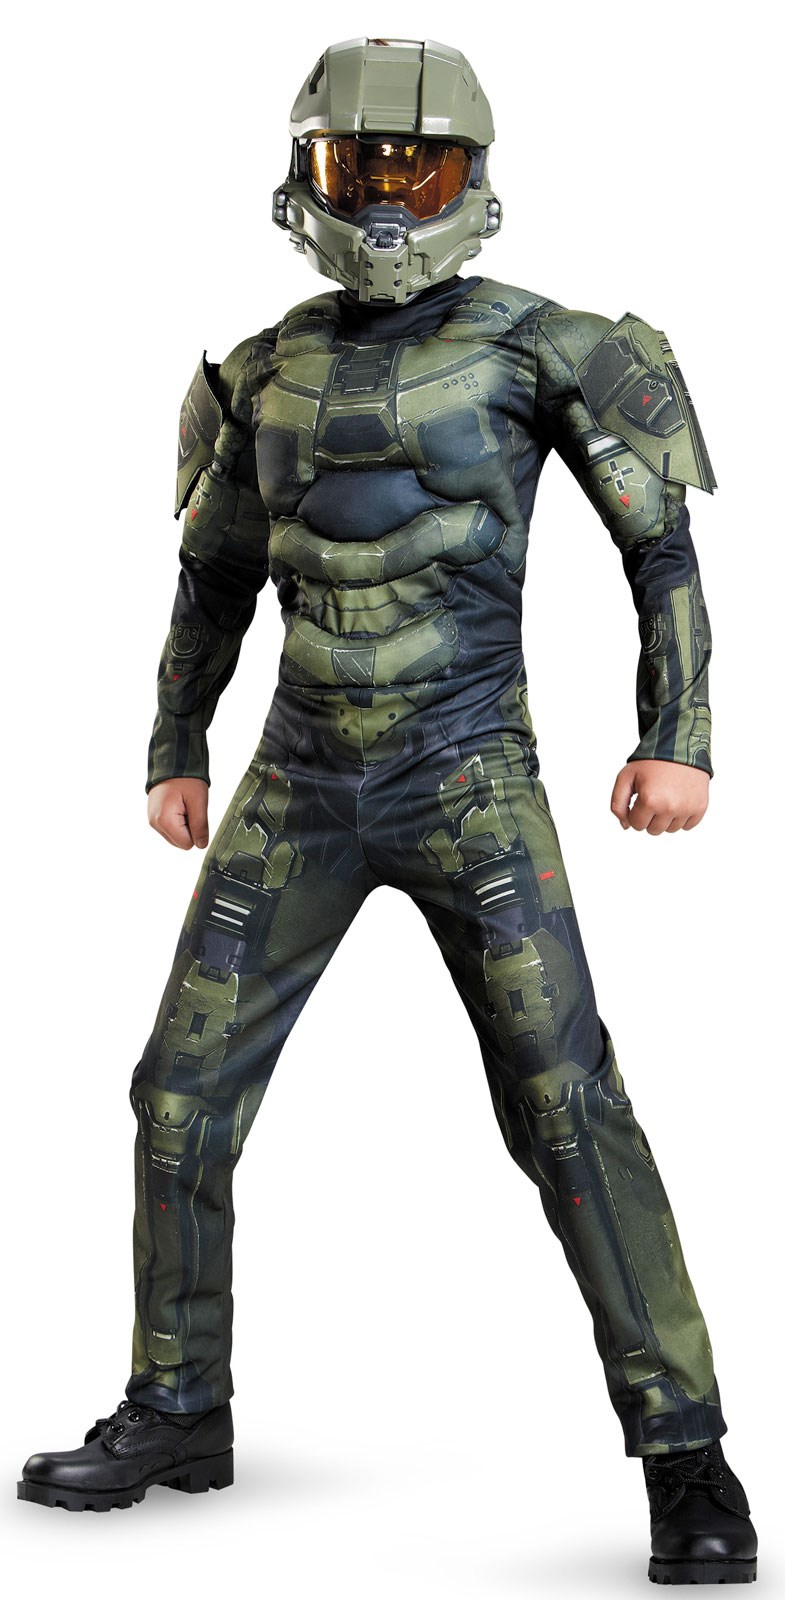 Halo: Master Chief Muscle Costume For Kids